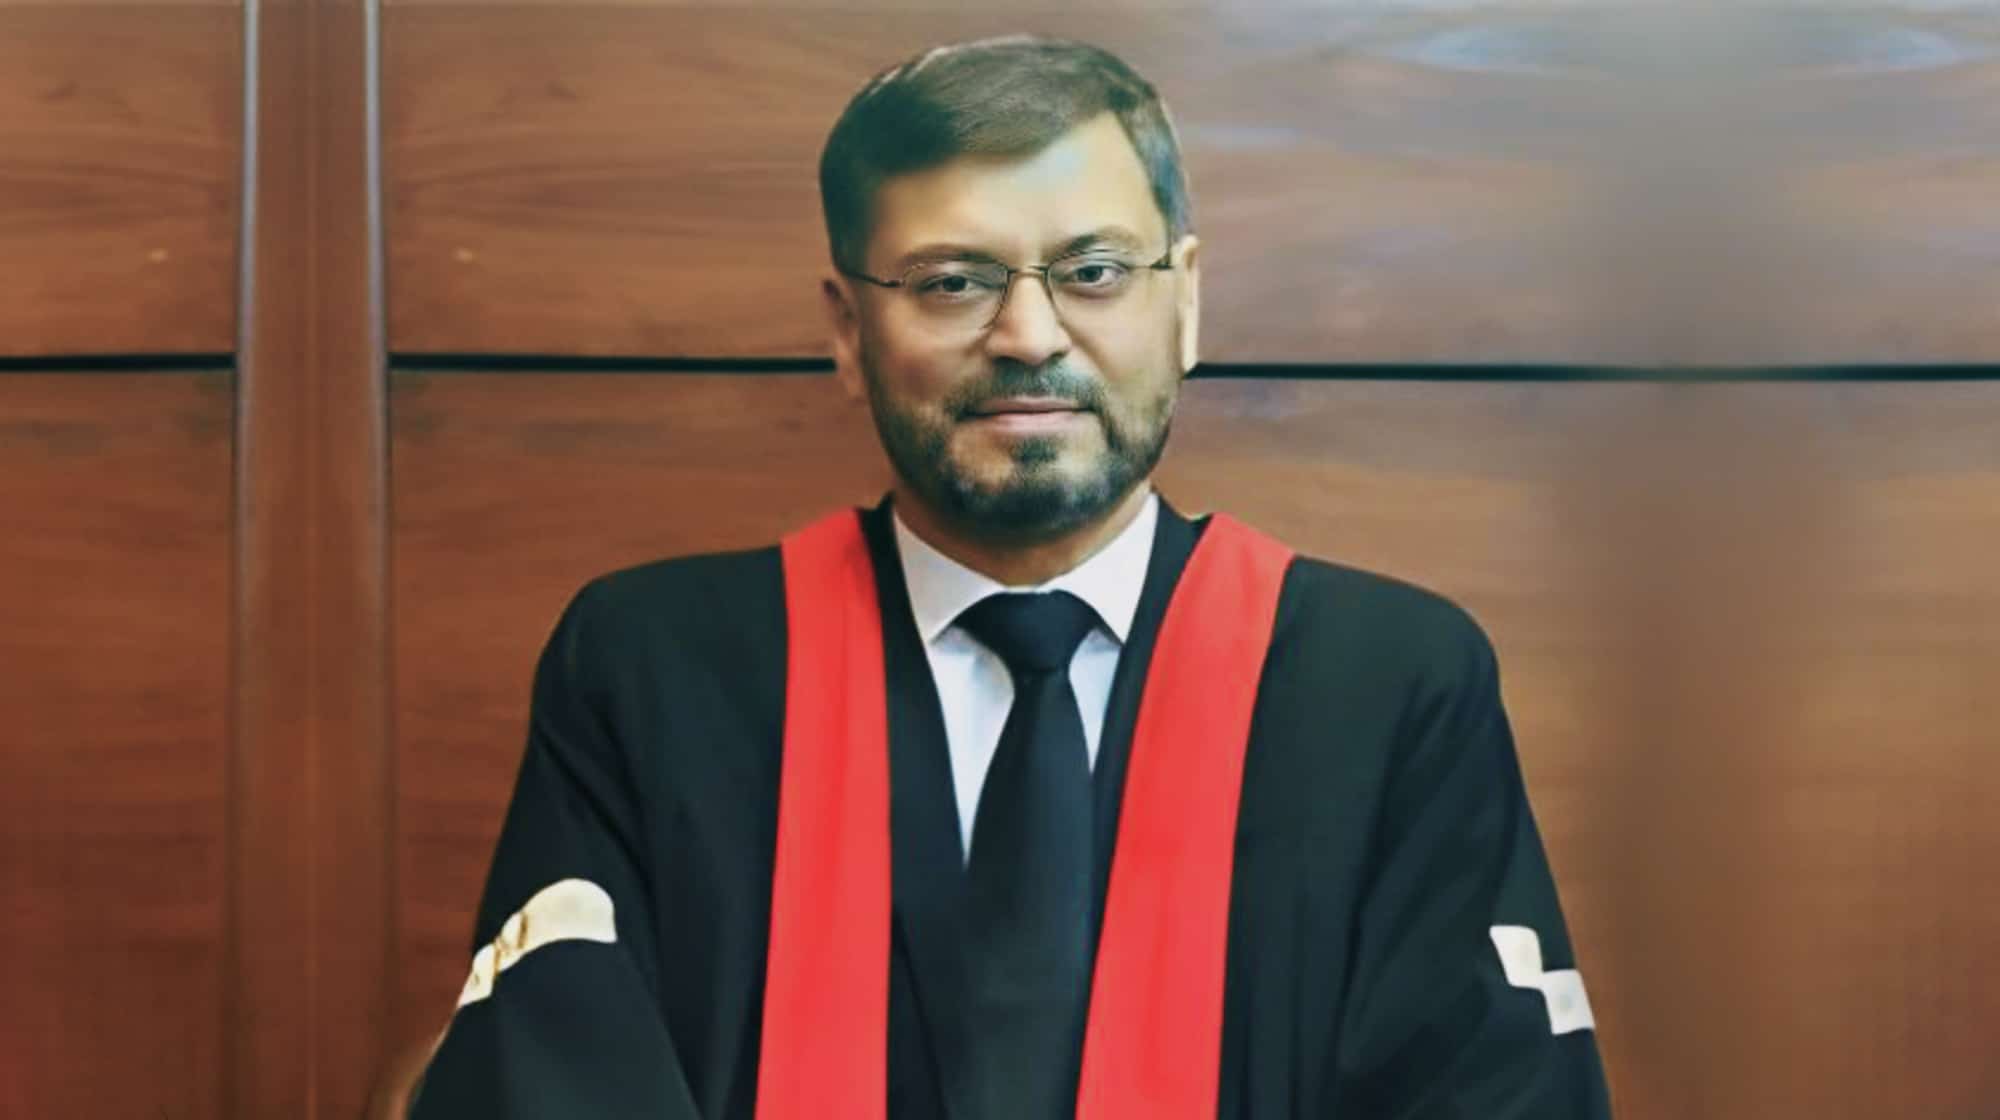 Justice Ibrahim Sworn in as Chief Justice of Peshawar High Court